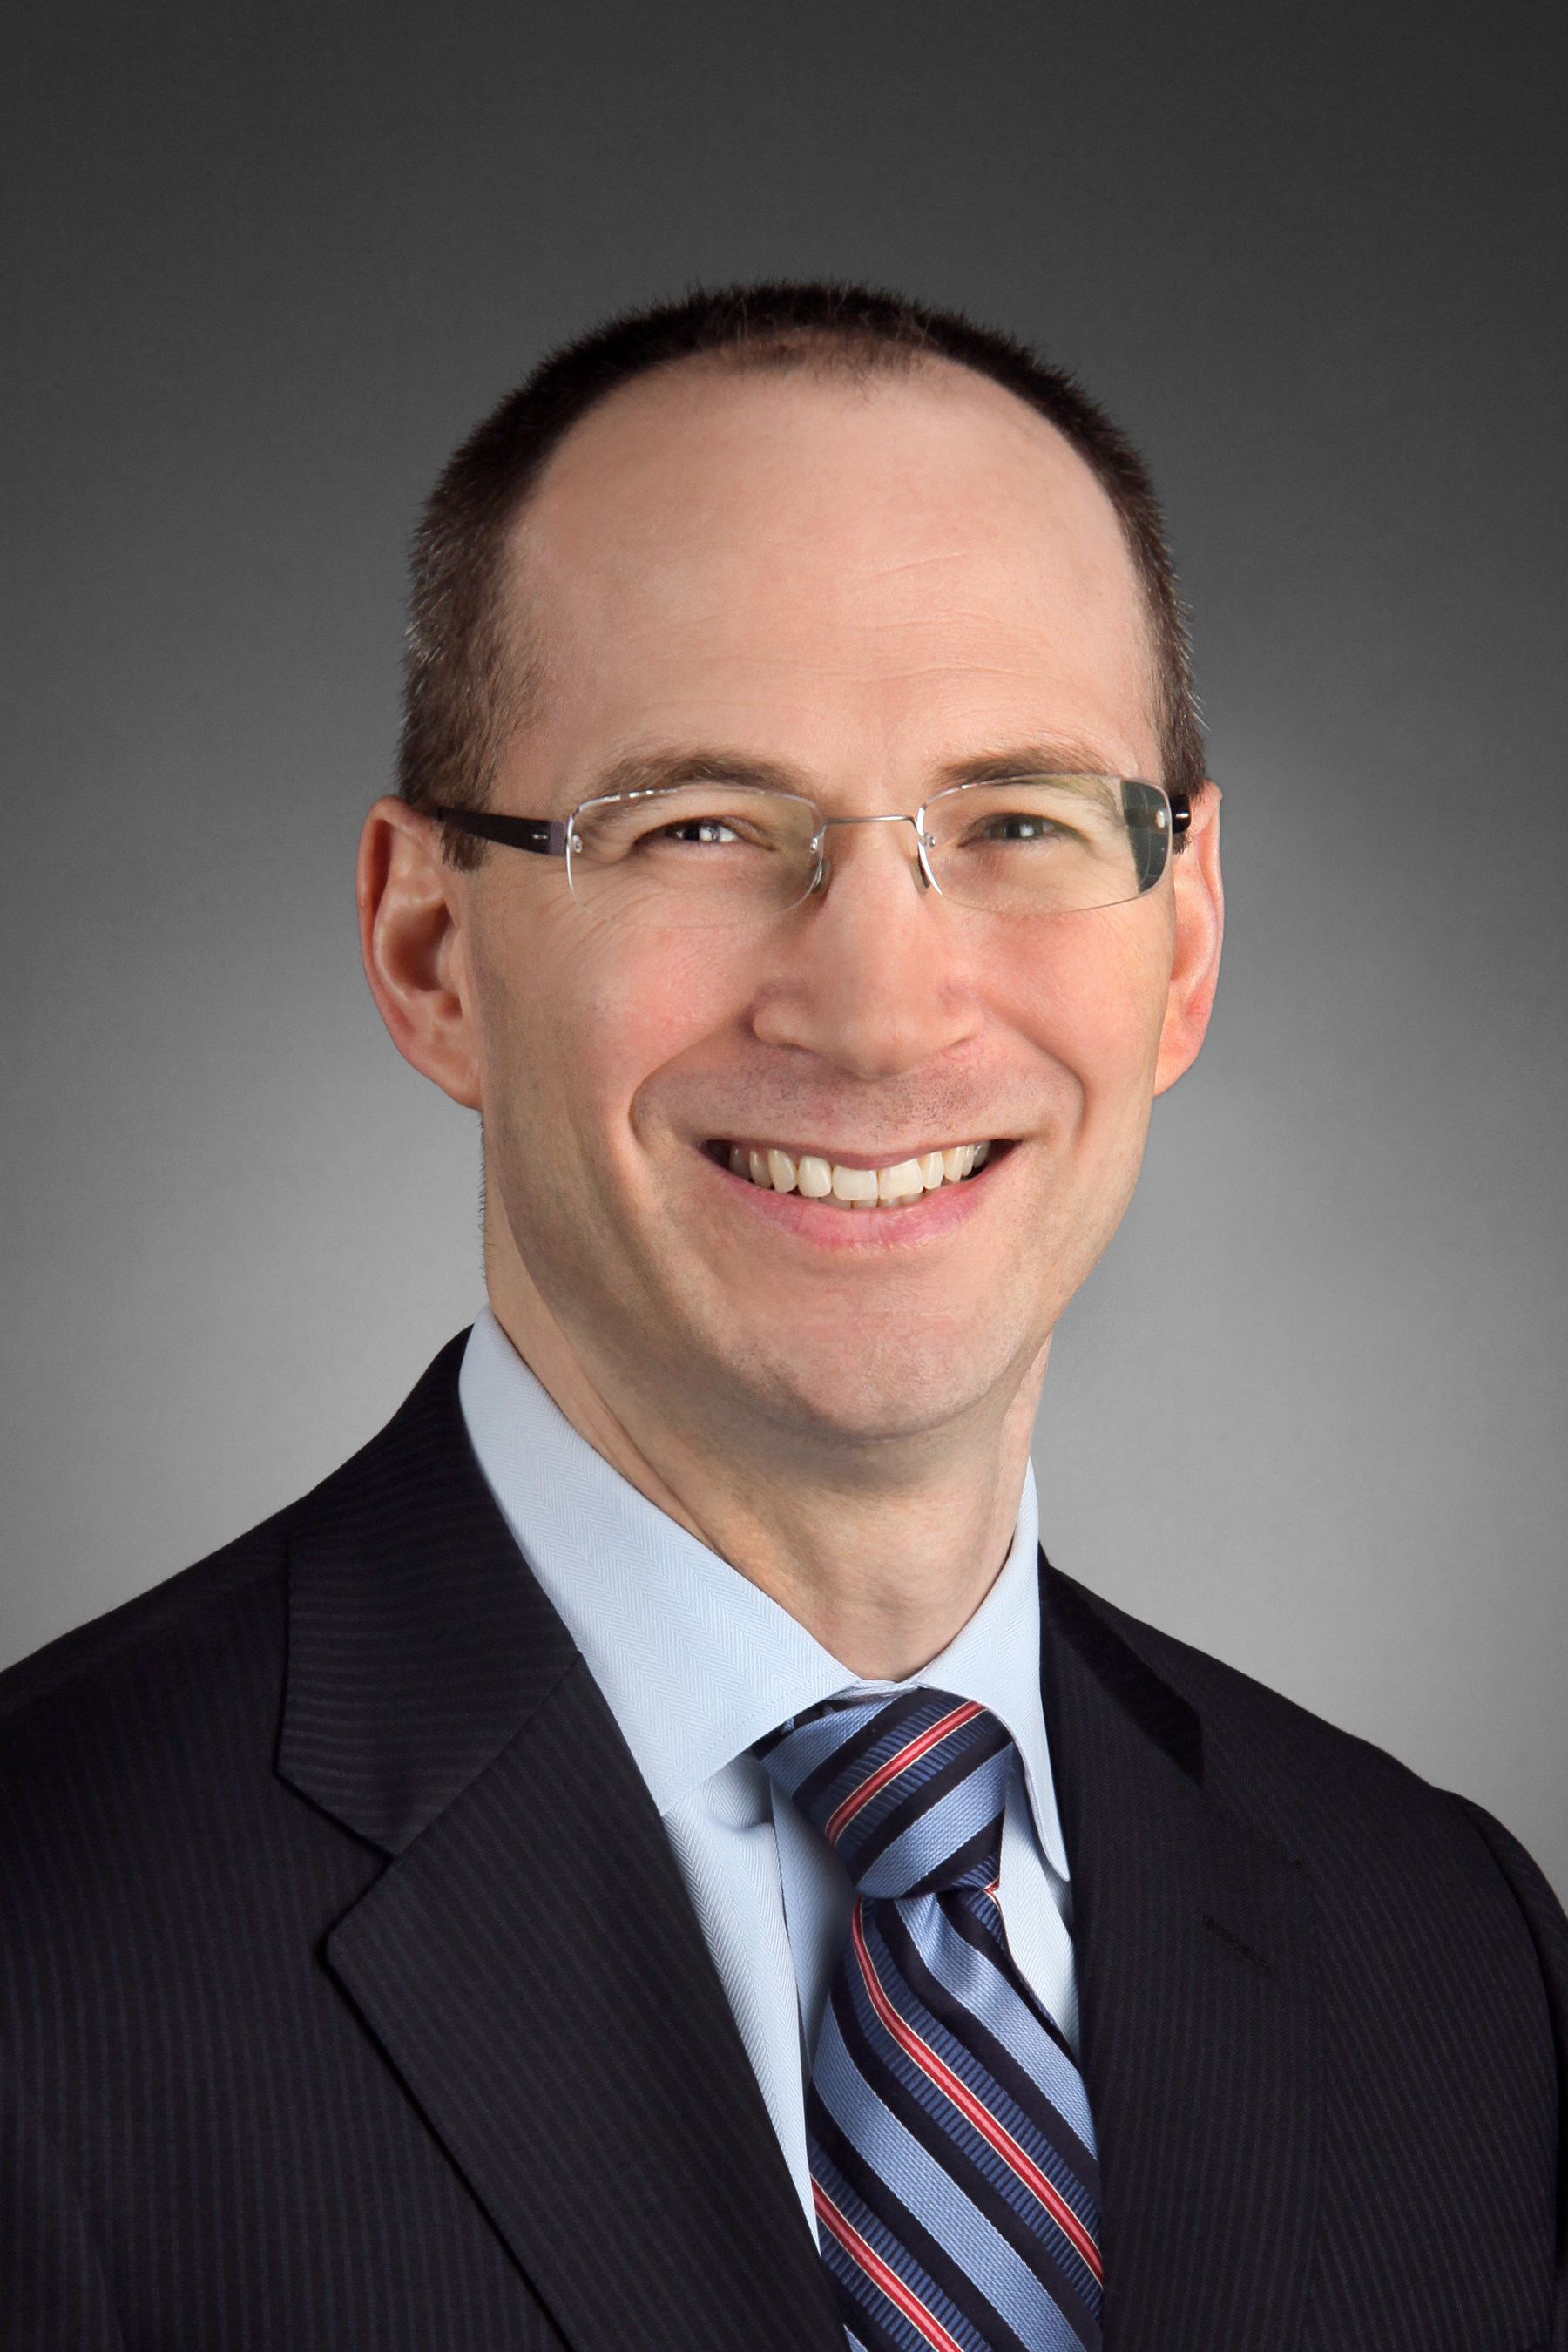 Paul T. Cottey joins health care firm Water Street as CIO.